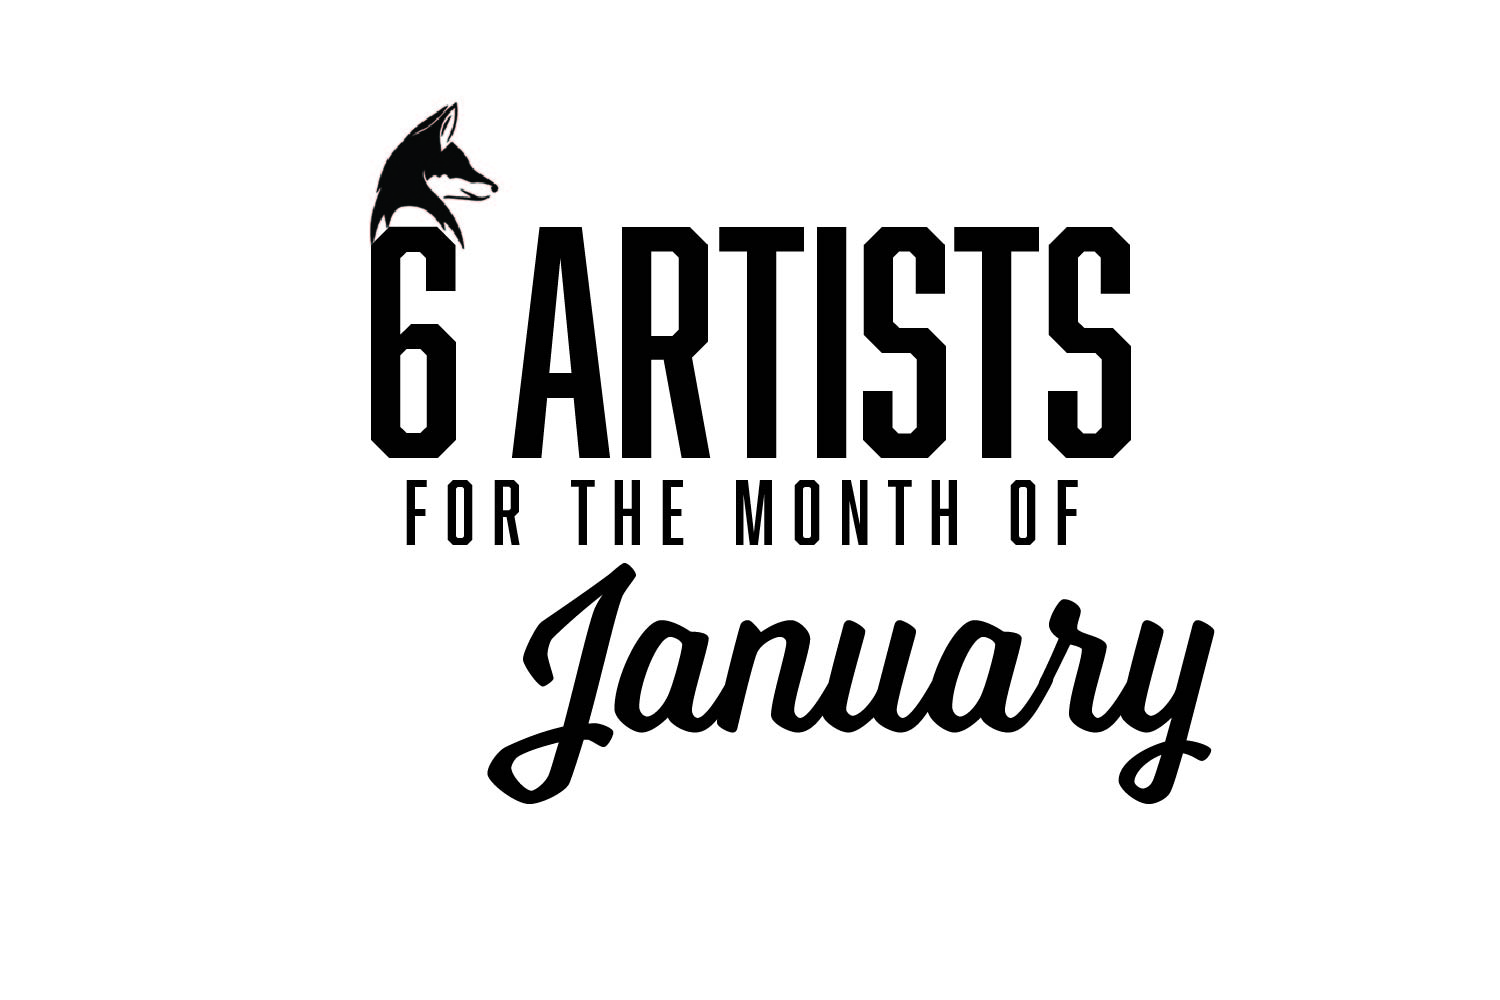 Six+Artists+You+Should+Be+Listening+To%3A+January+2021+EDITION